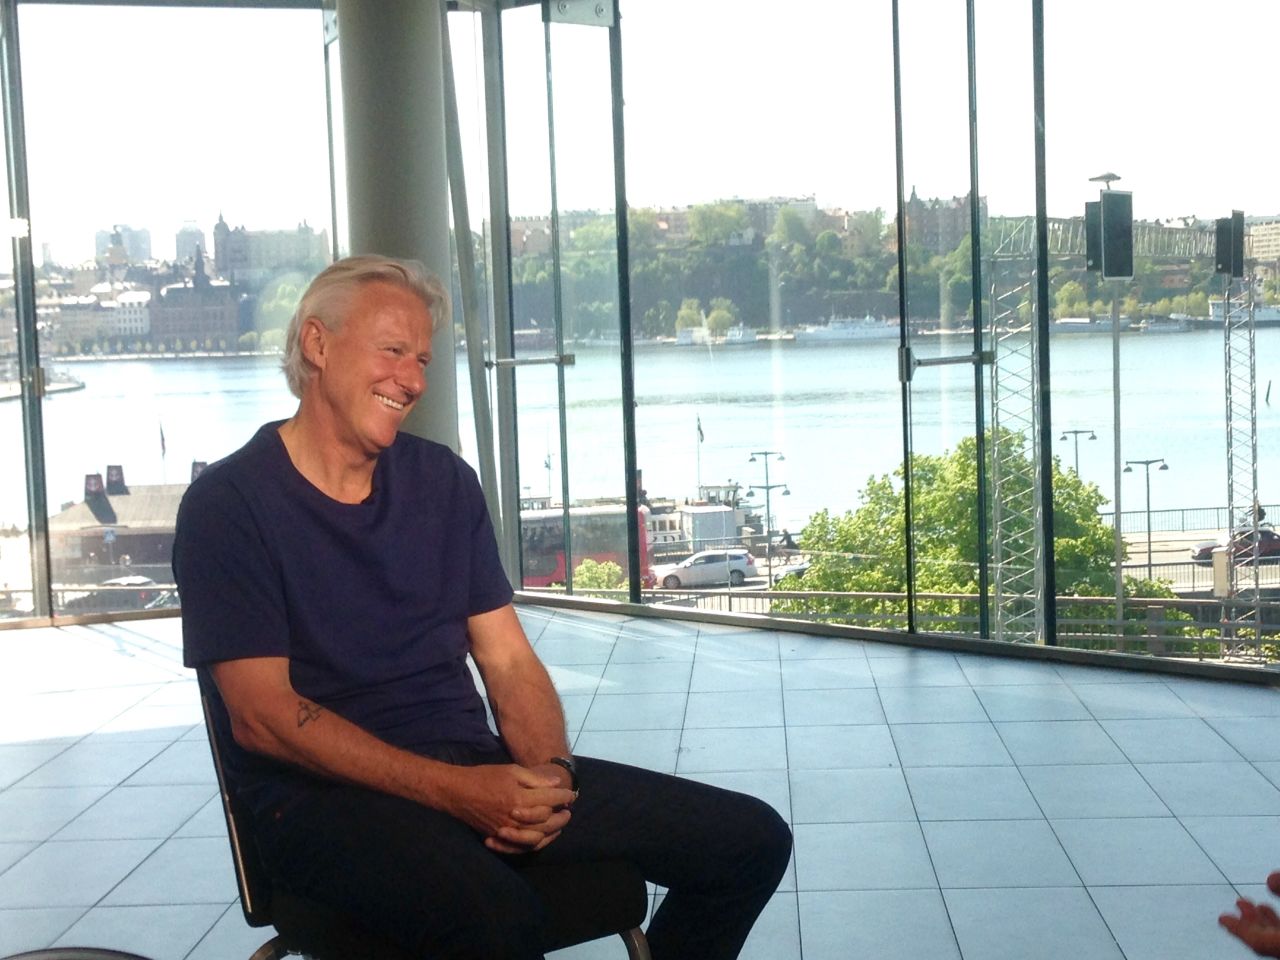 Speaking to CNN Open Court's Pat Cash in Stockholm, Borg appeared relaxed and happy. "During our time we didn't count (records) -- you know we could make so many, me, McEnroe, Connors. I was just thinking about playing tennis."